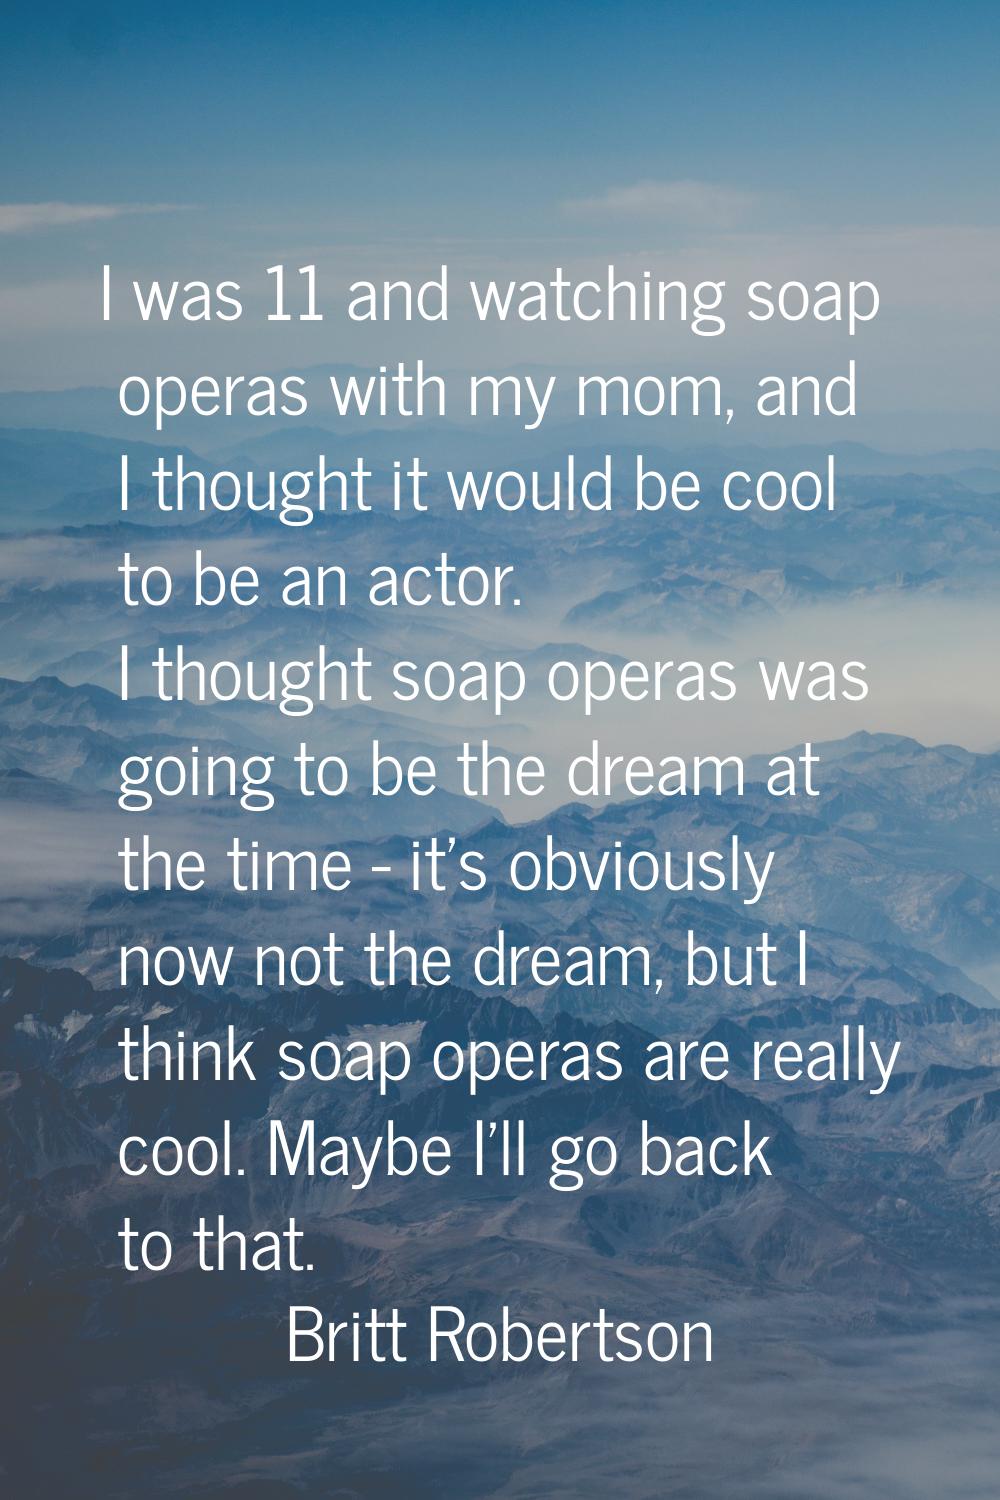 I was 11 and watching soap operas with my mom, and I thought it would be cool to be an actor. I tho